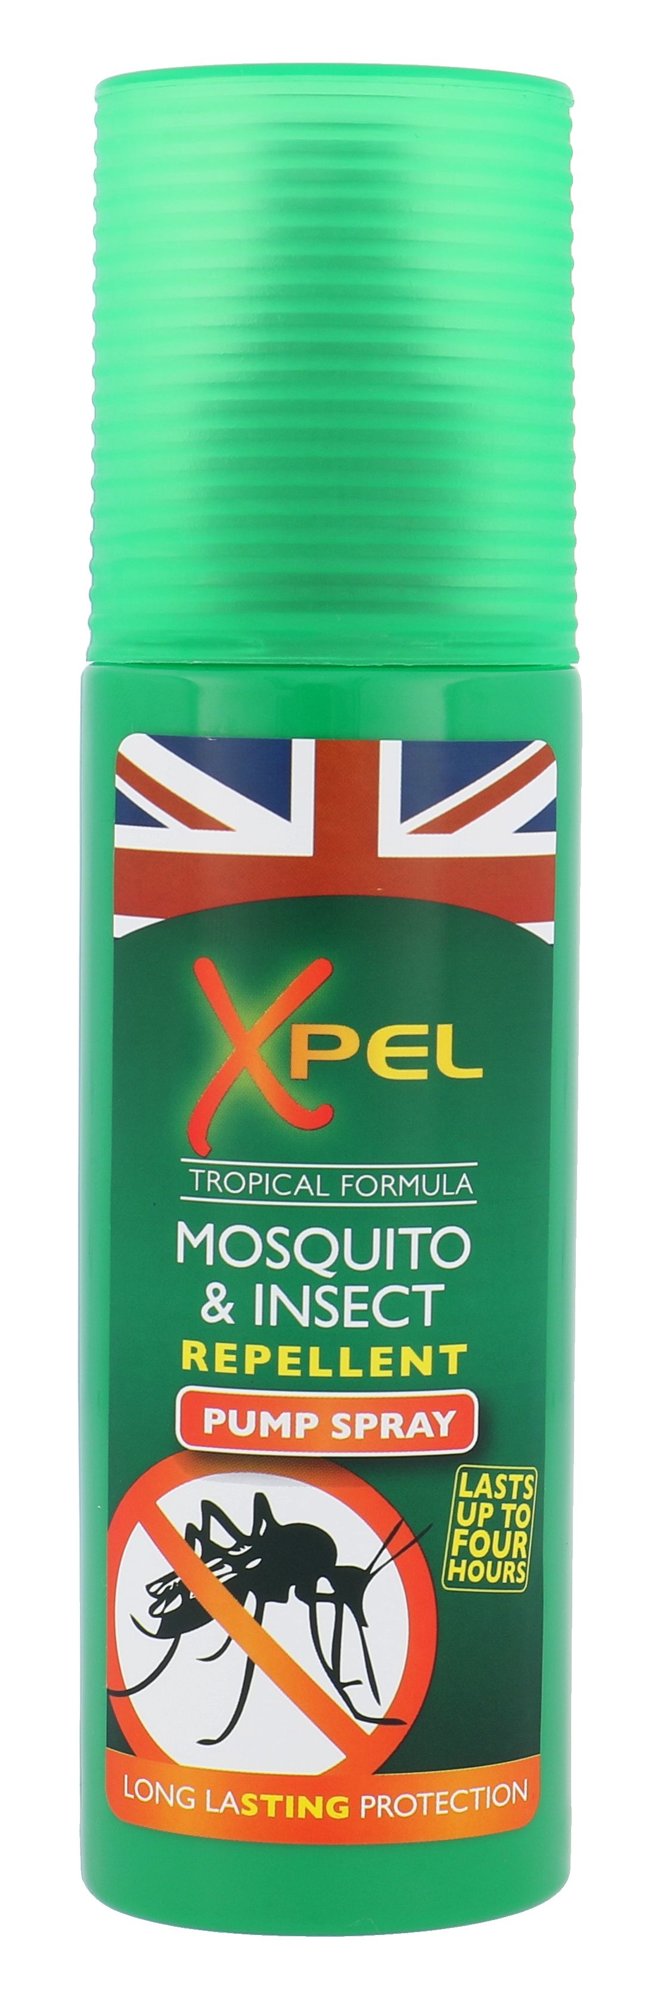 Xpel Mosquito & Insect repelentas